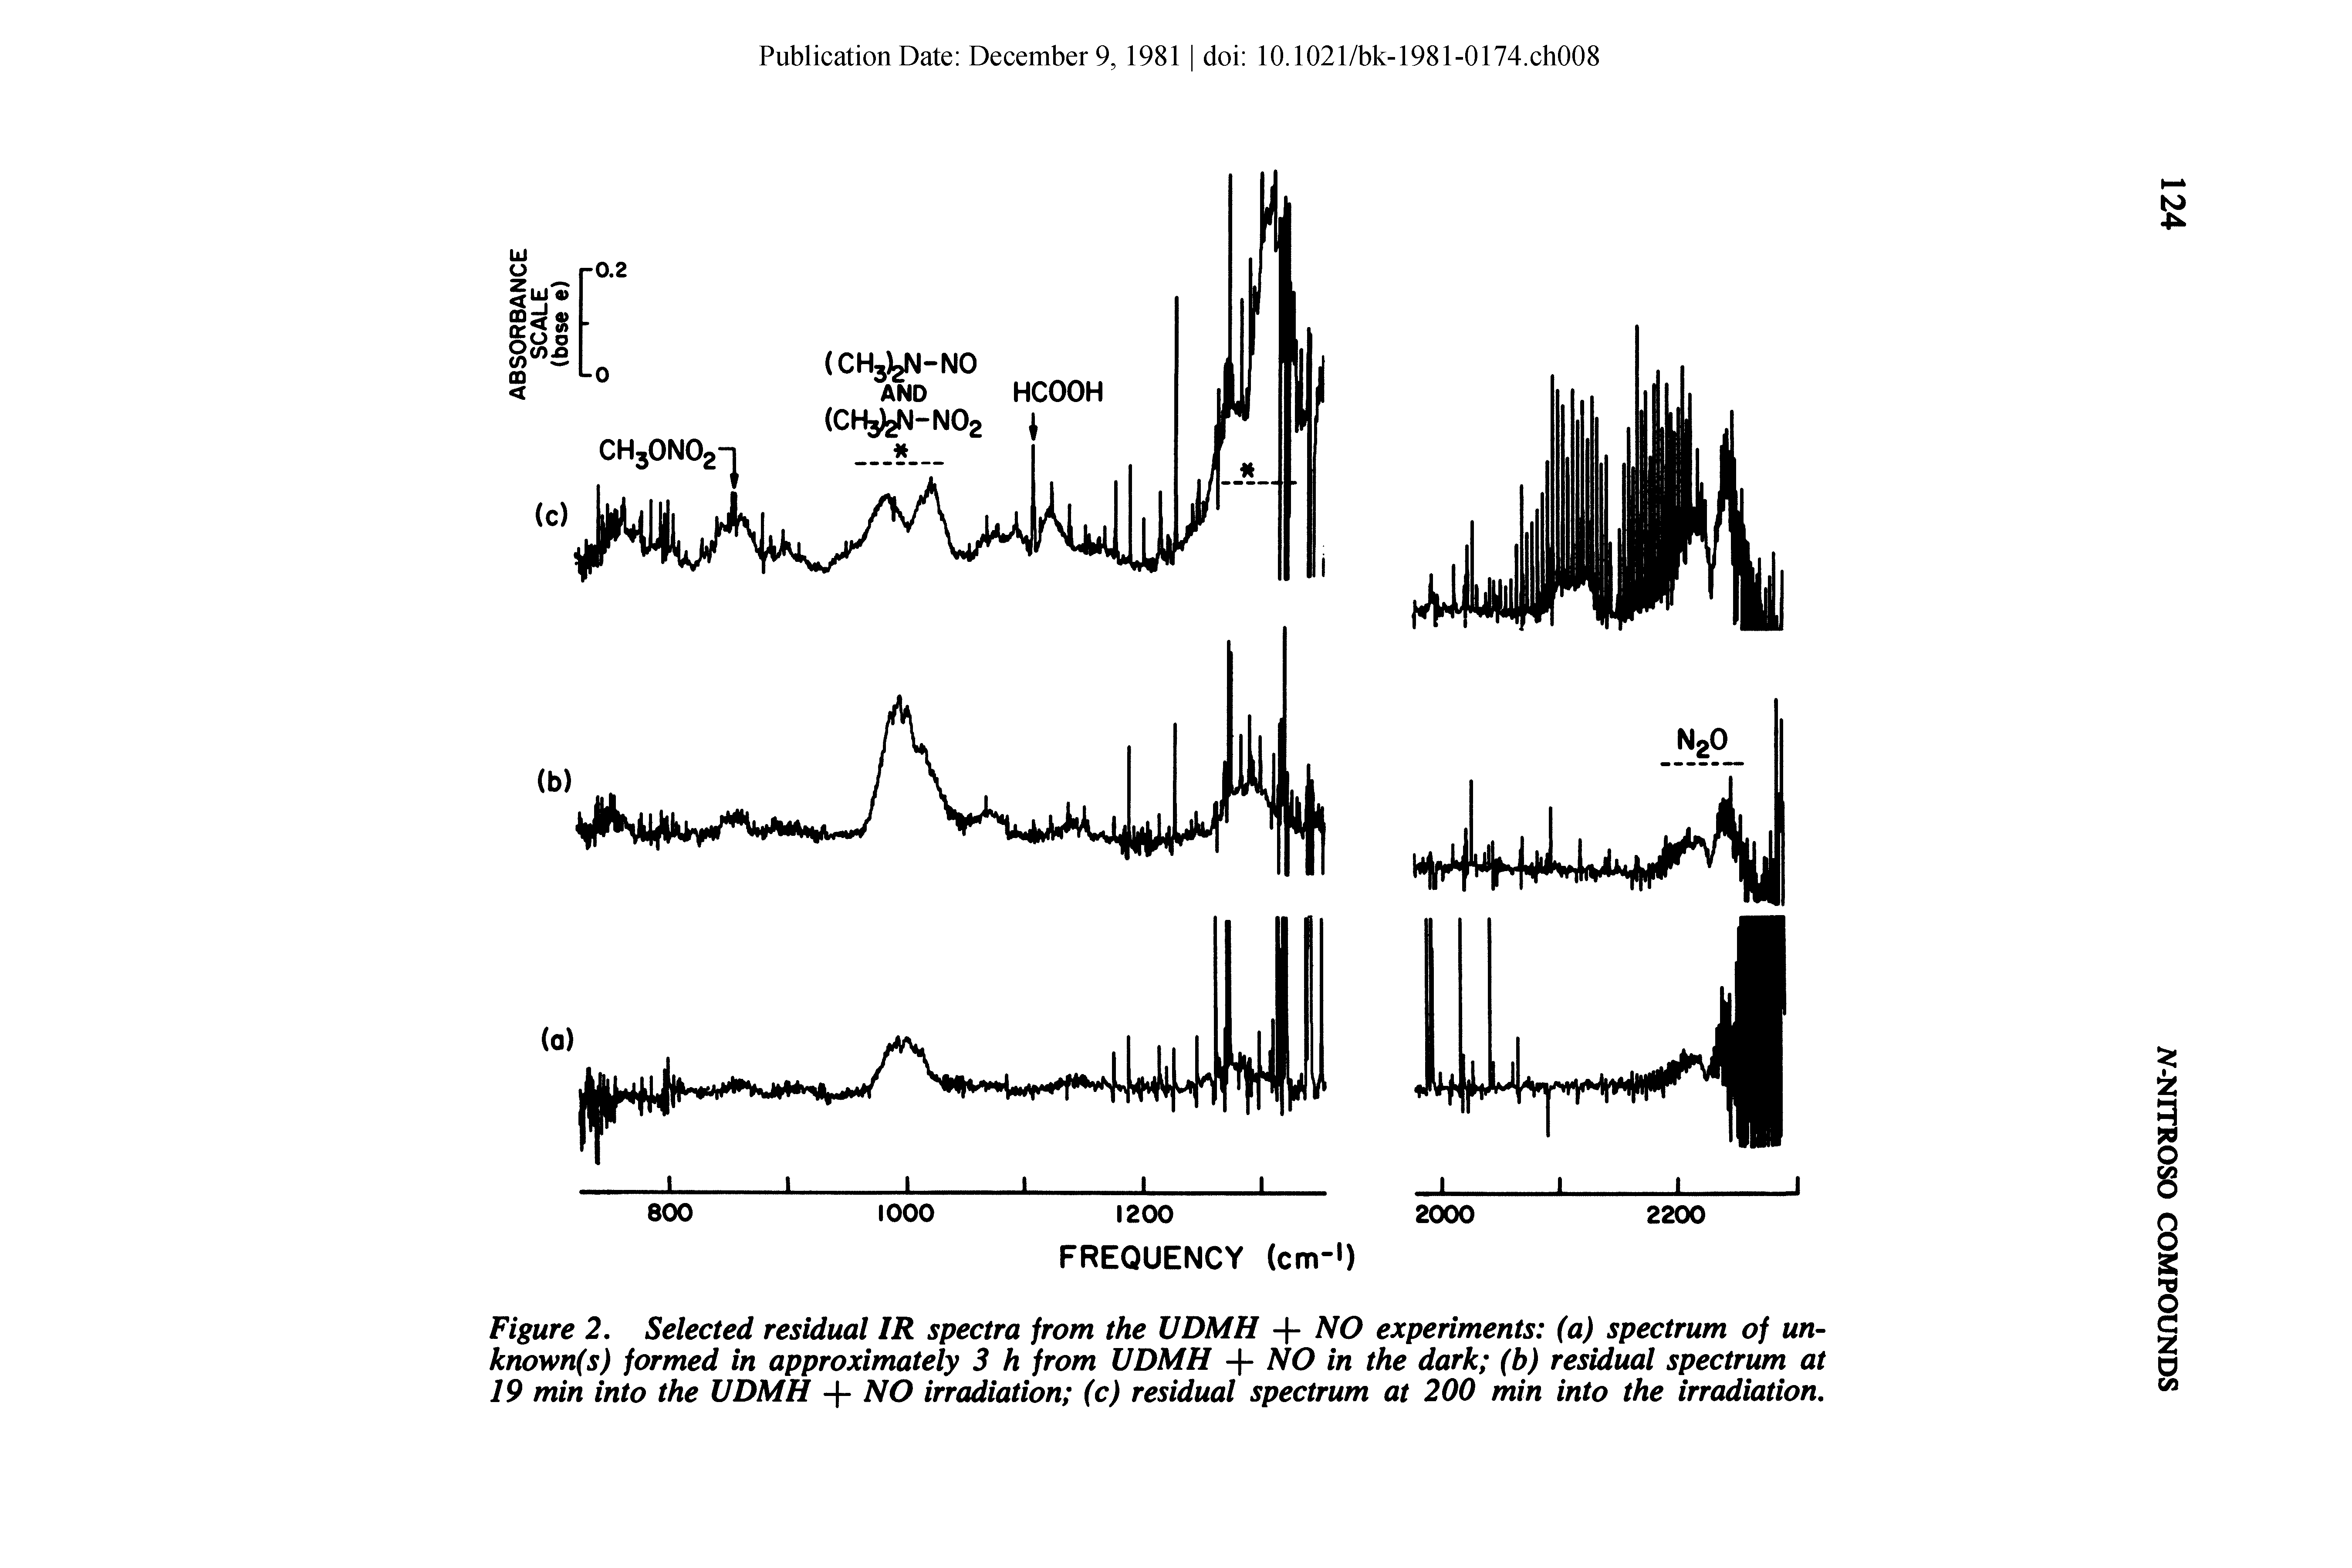 Figure 2, Selected residual IR spectra from the UDMH + NO experiments (a) spectrum of un-known(s) formed in approximately 3 h from UDMH + NO in the dark (b) residual spectrum at 19 min into the UDMH + NO irradiation (c) residual spectrum at 200 min into the irradiation.